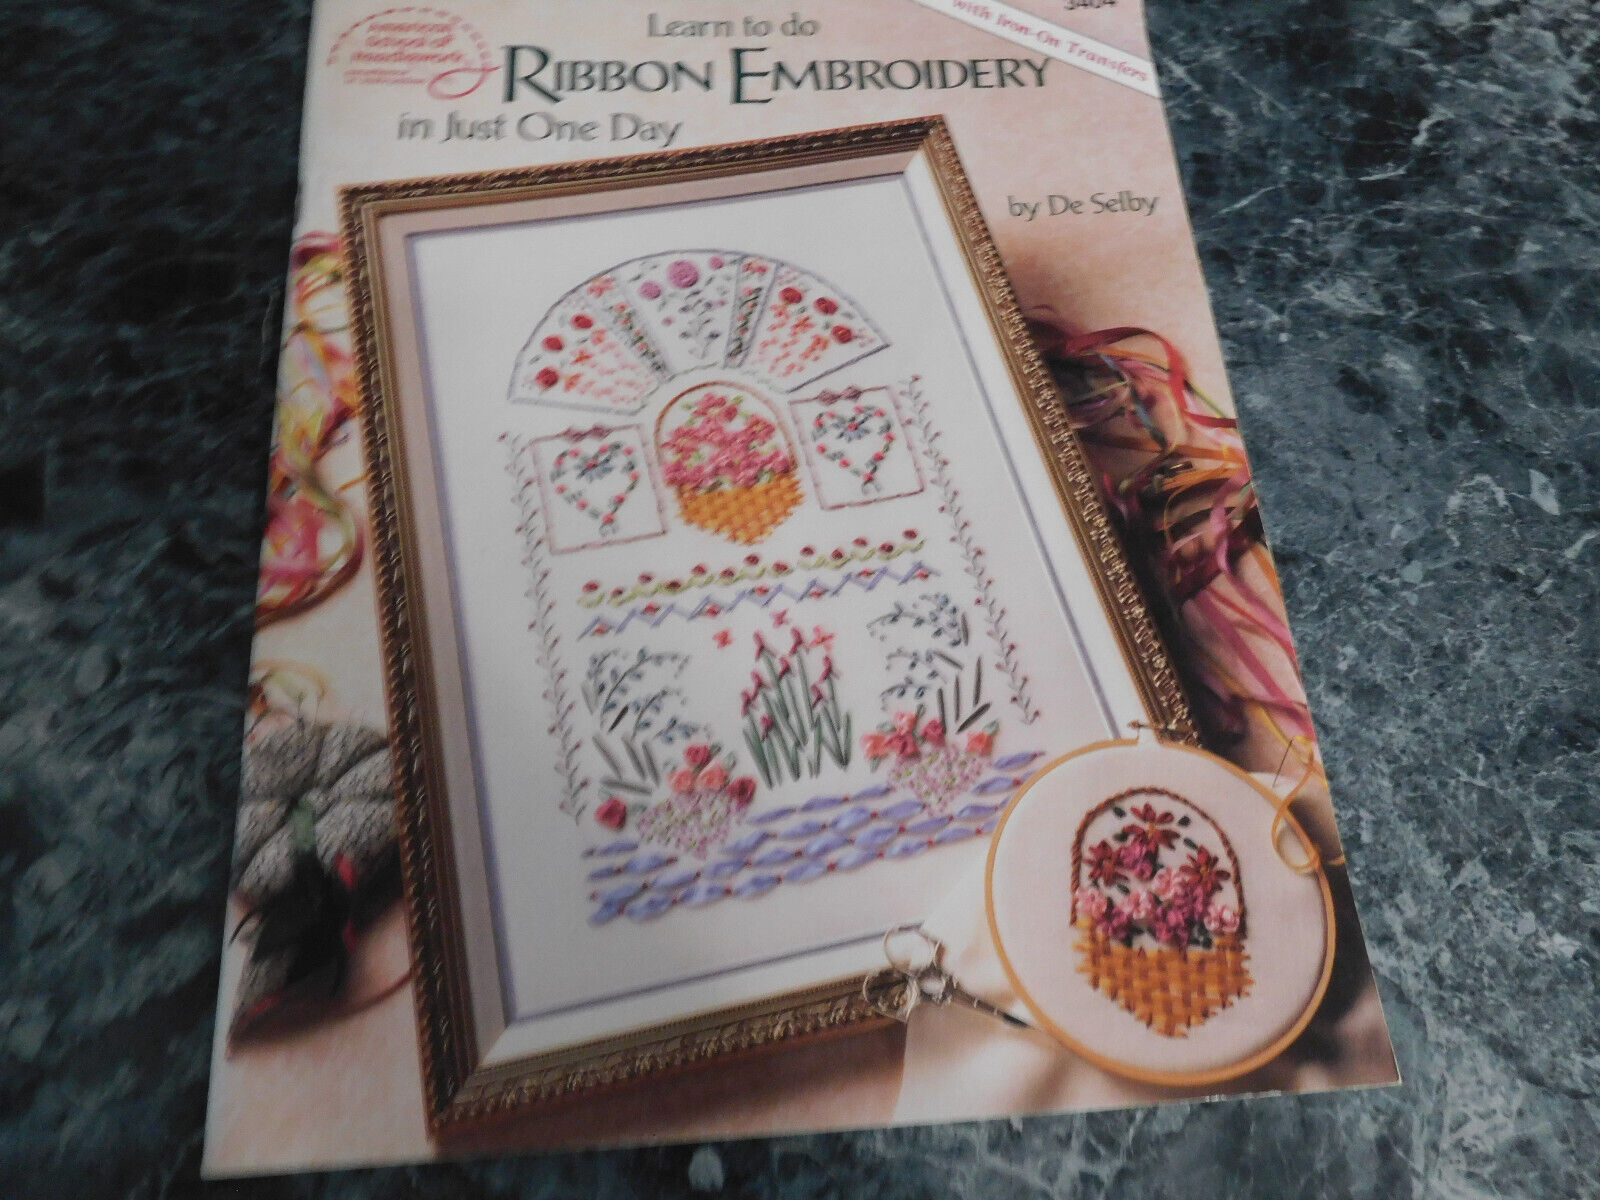 Learn to do Ribbon Embroidery In Just One Day by De Selby - $3.99